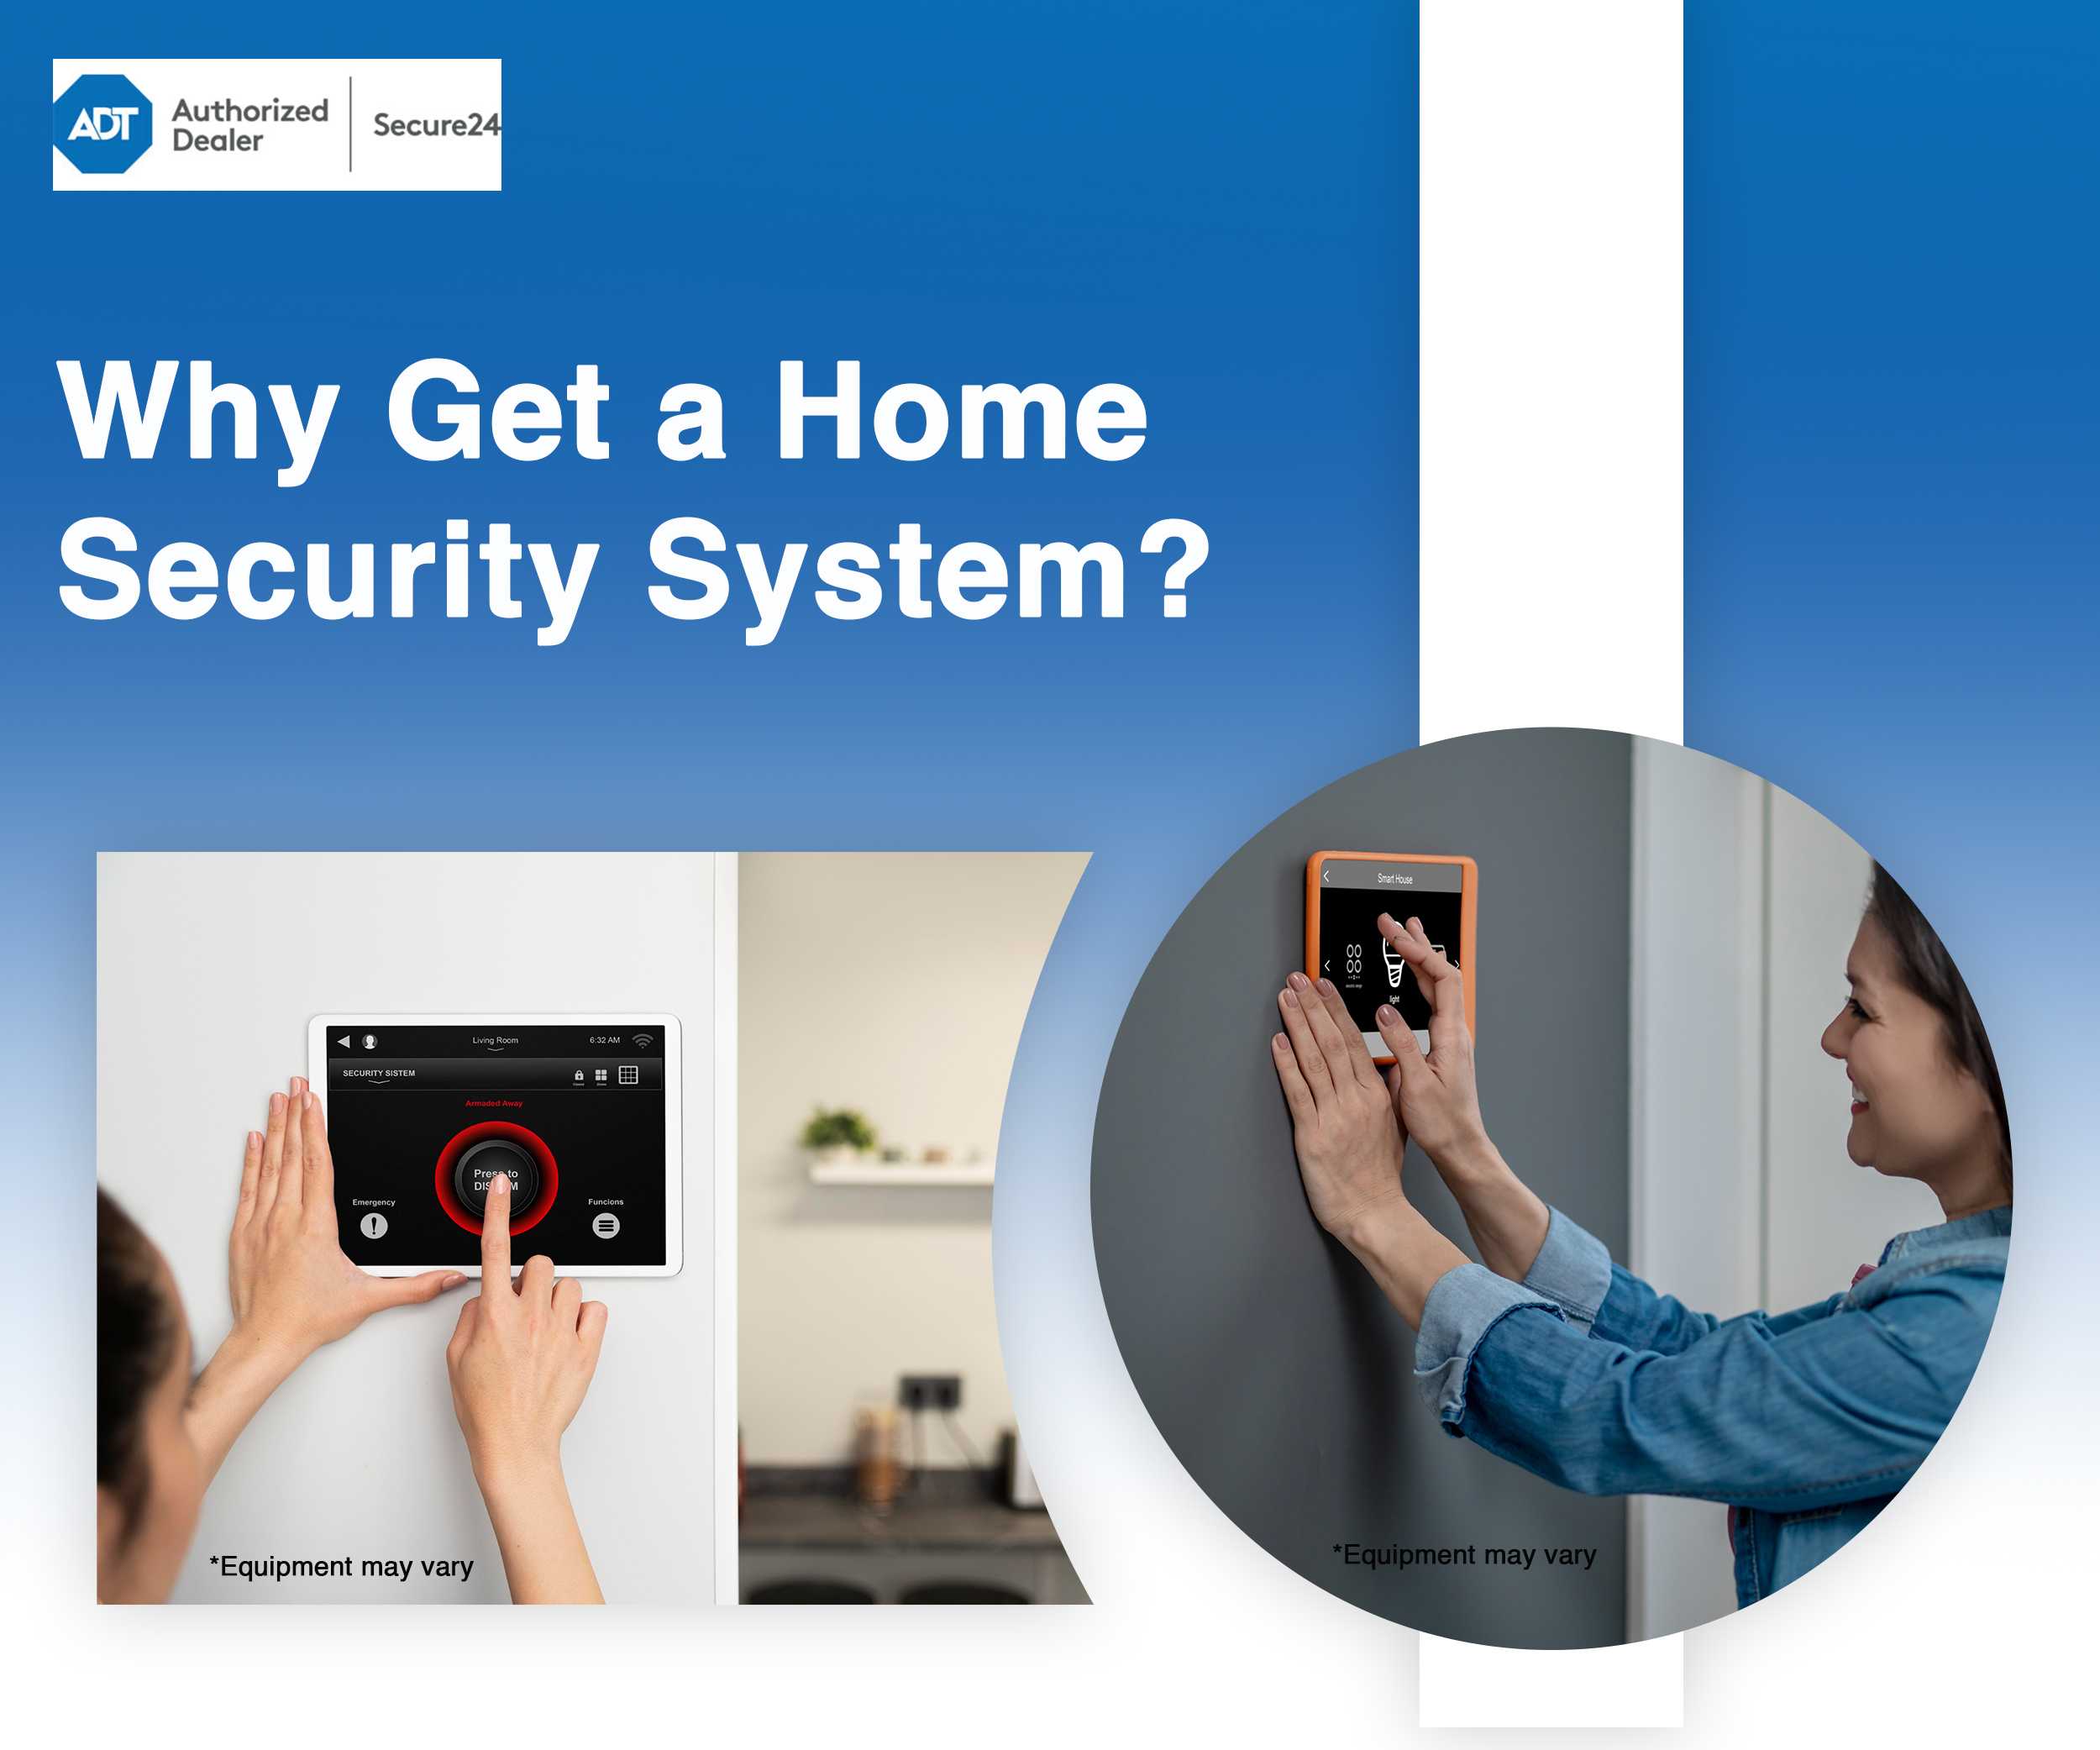 Why Get a Home Security System